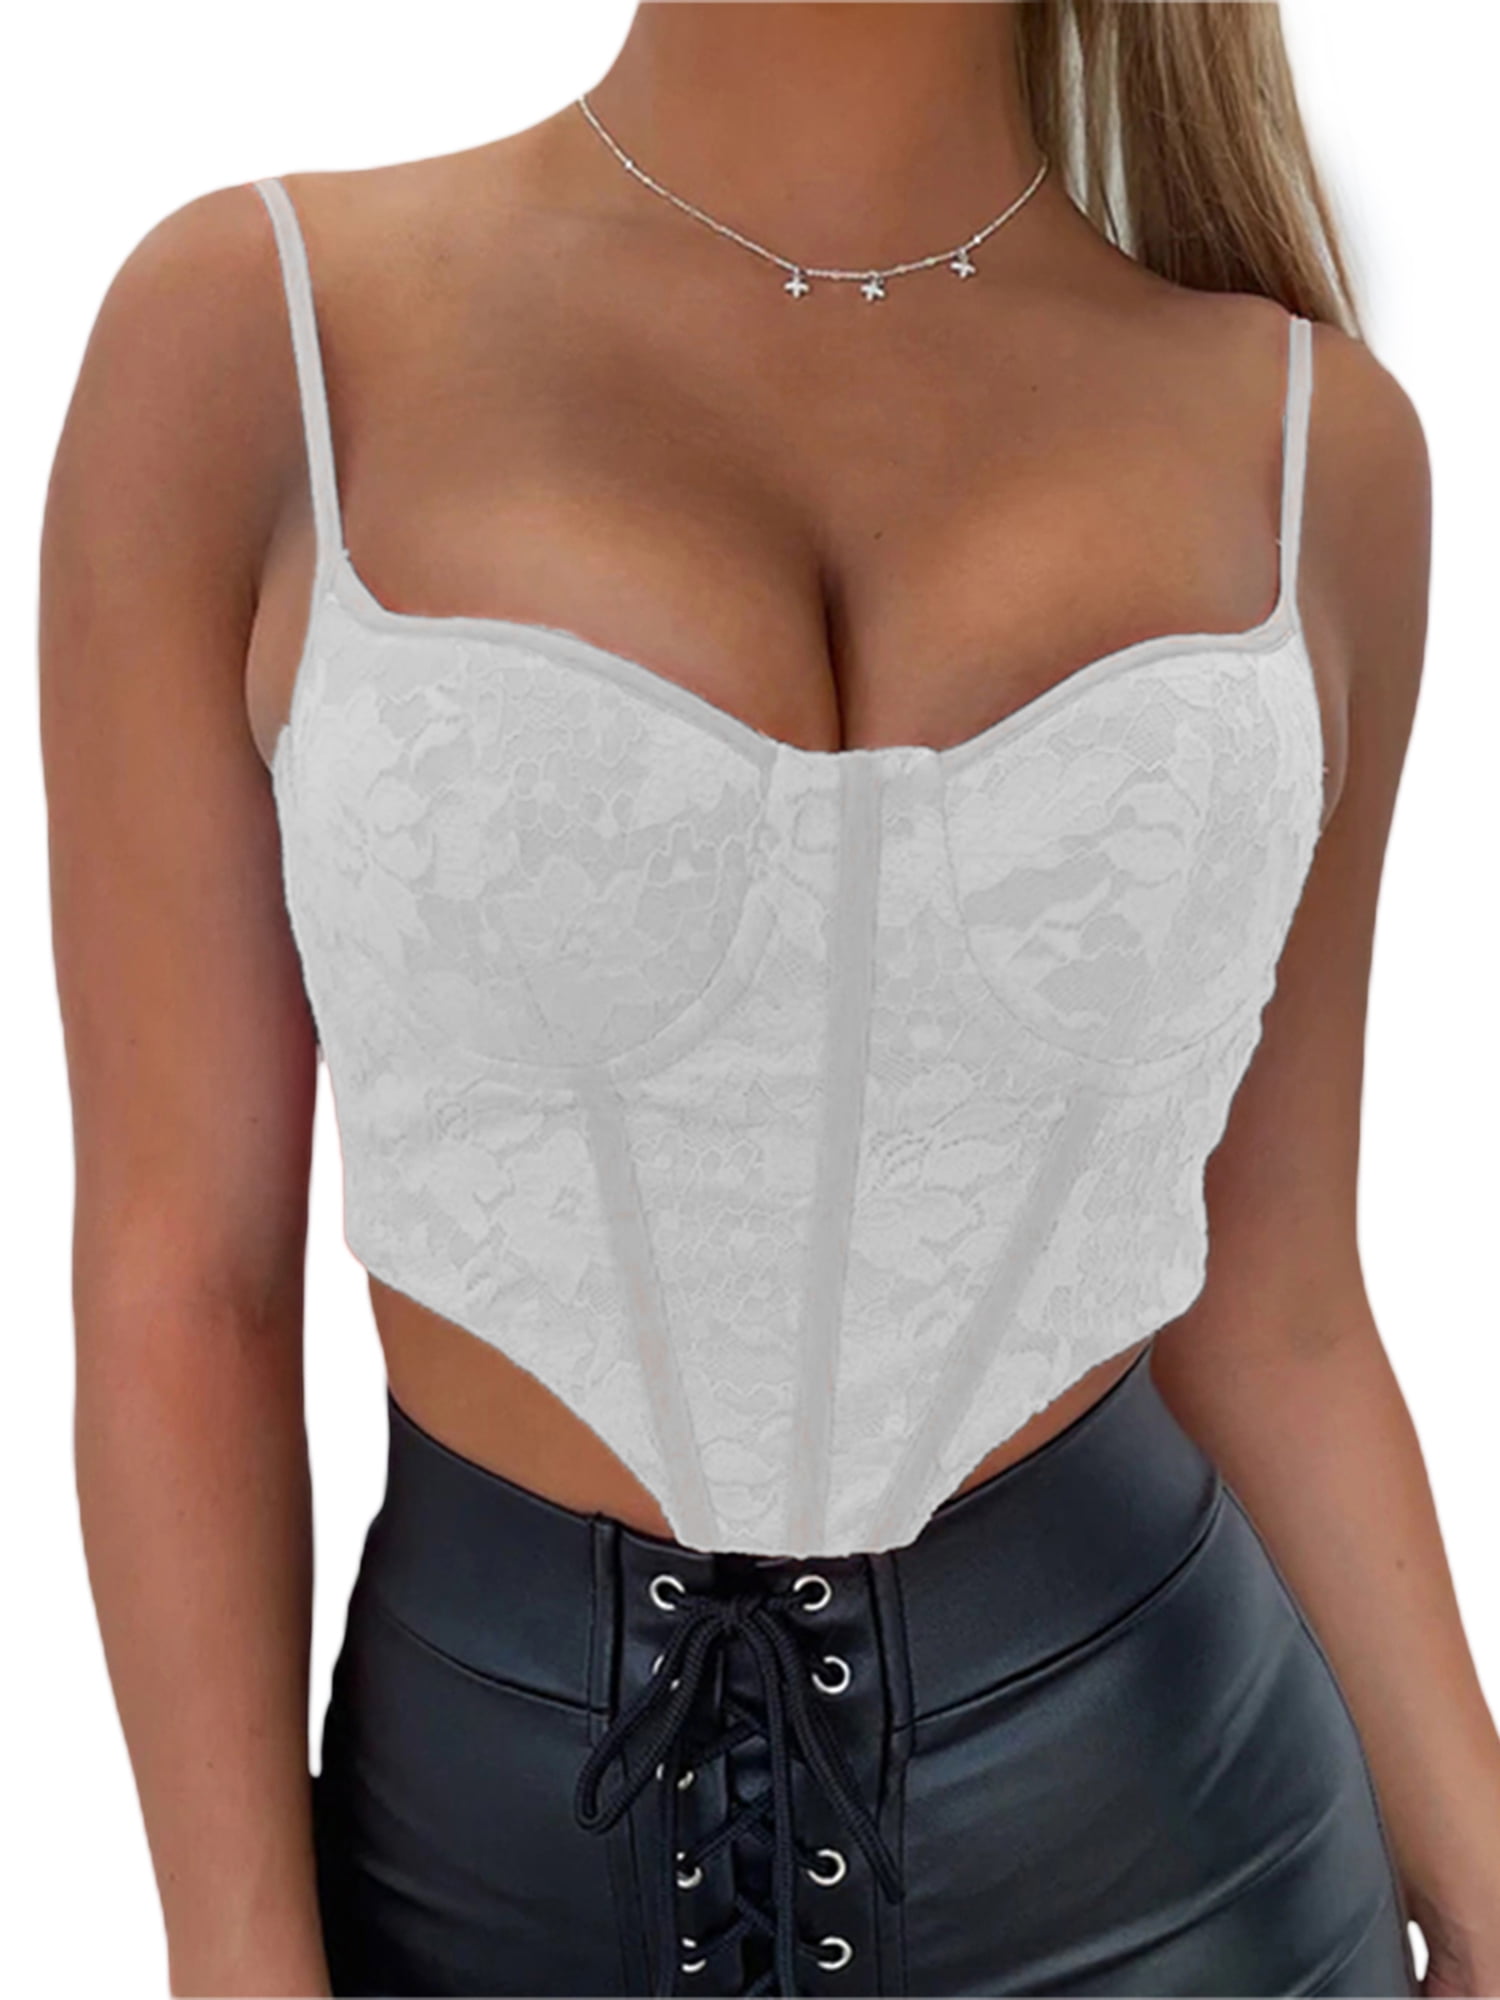 Canrulo Women Lace Corset Tops Bustiers Push Up Off Shoulder Crop